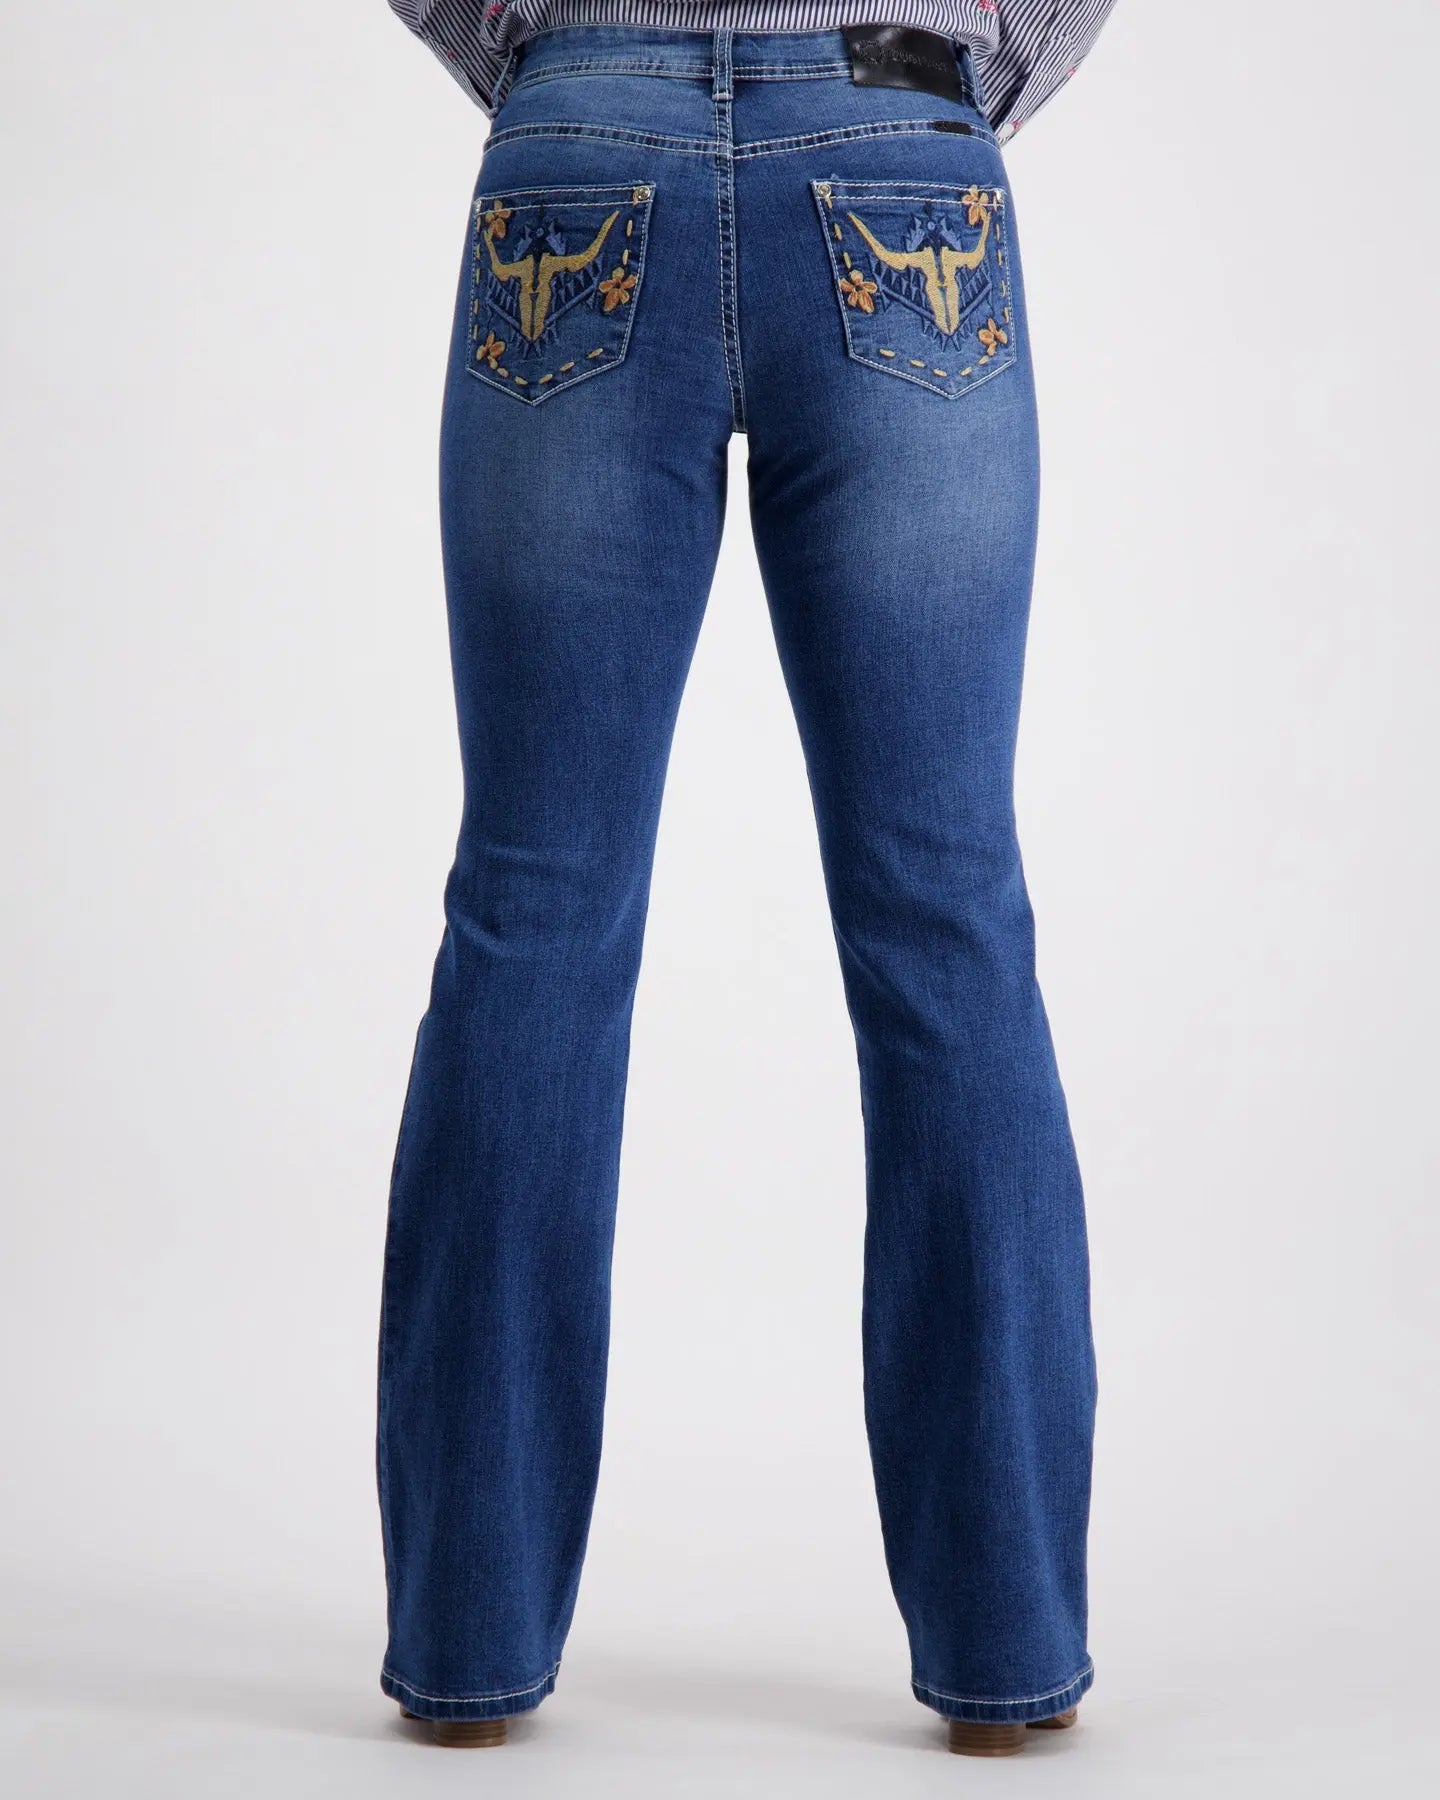 Fancy pockets Montana Boot-Cut Jeans Outback Supply Co